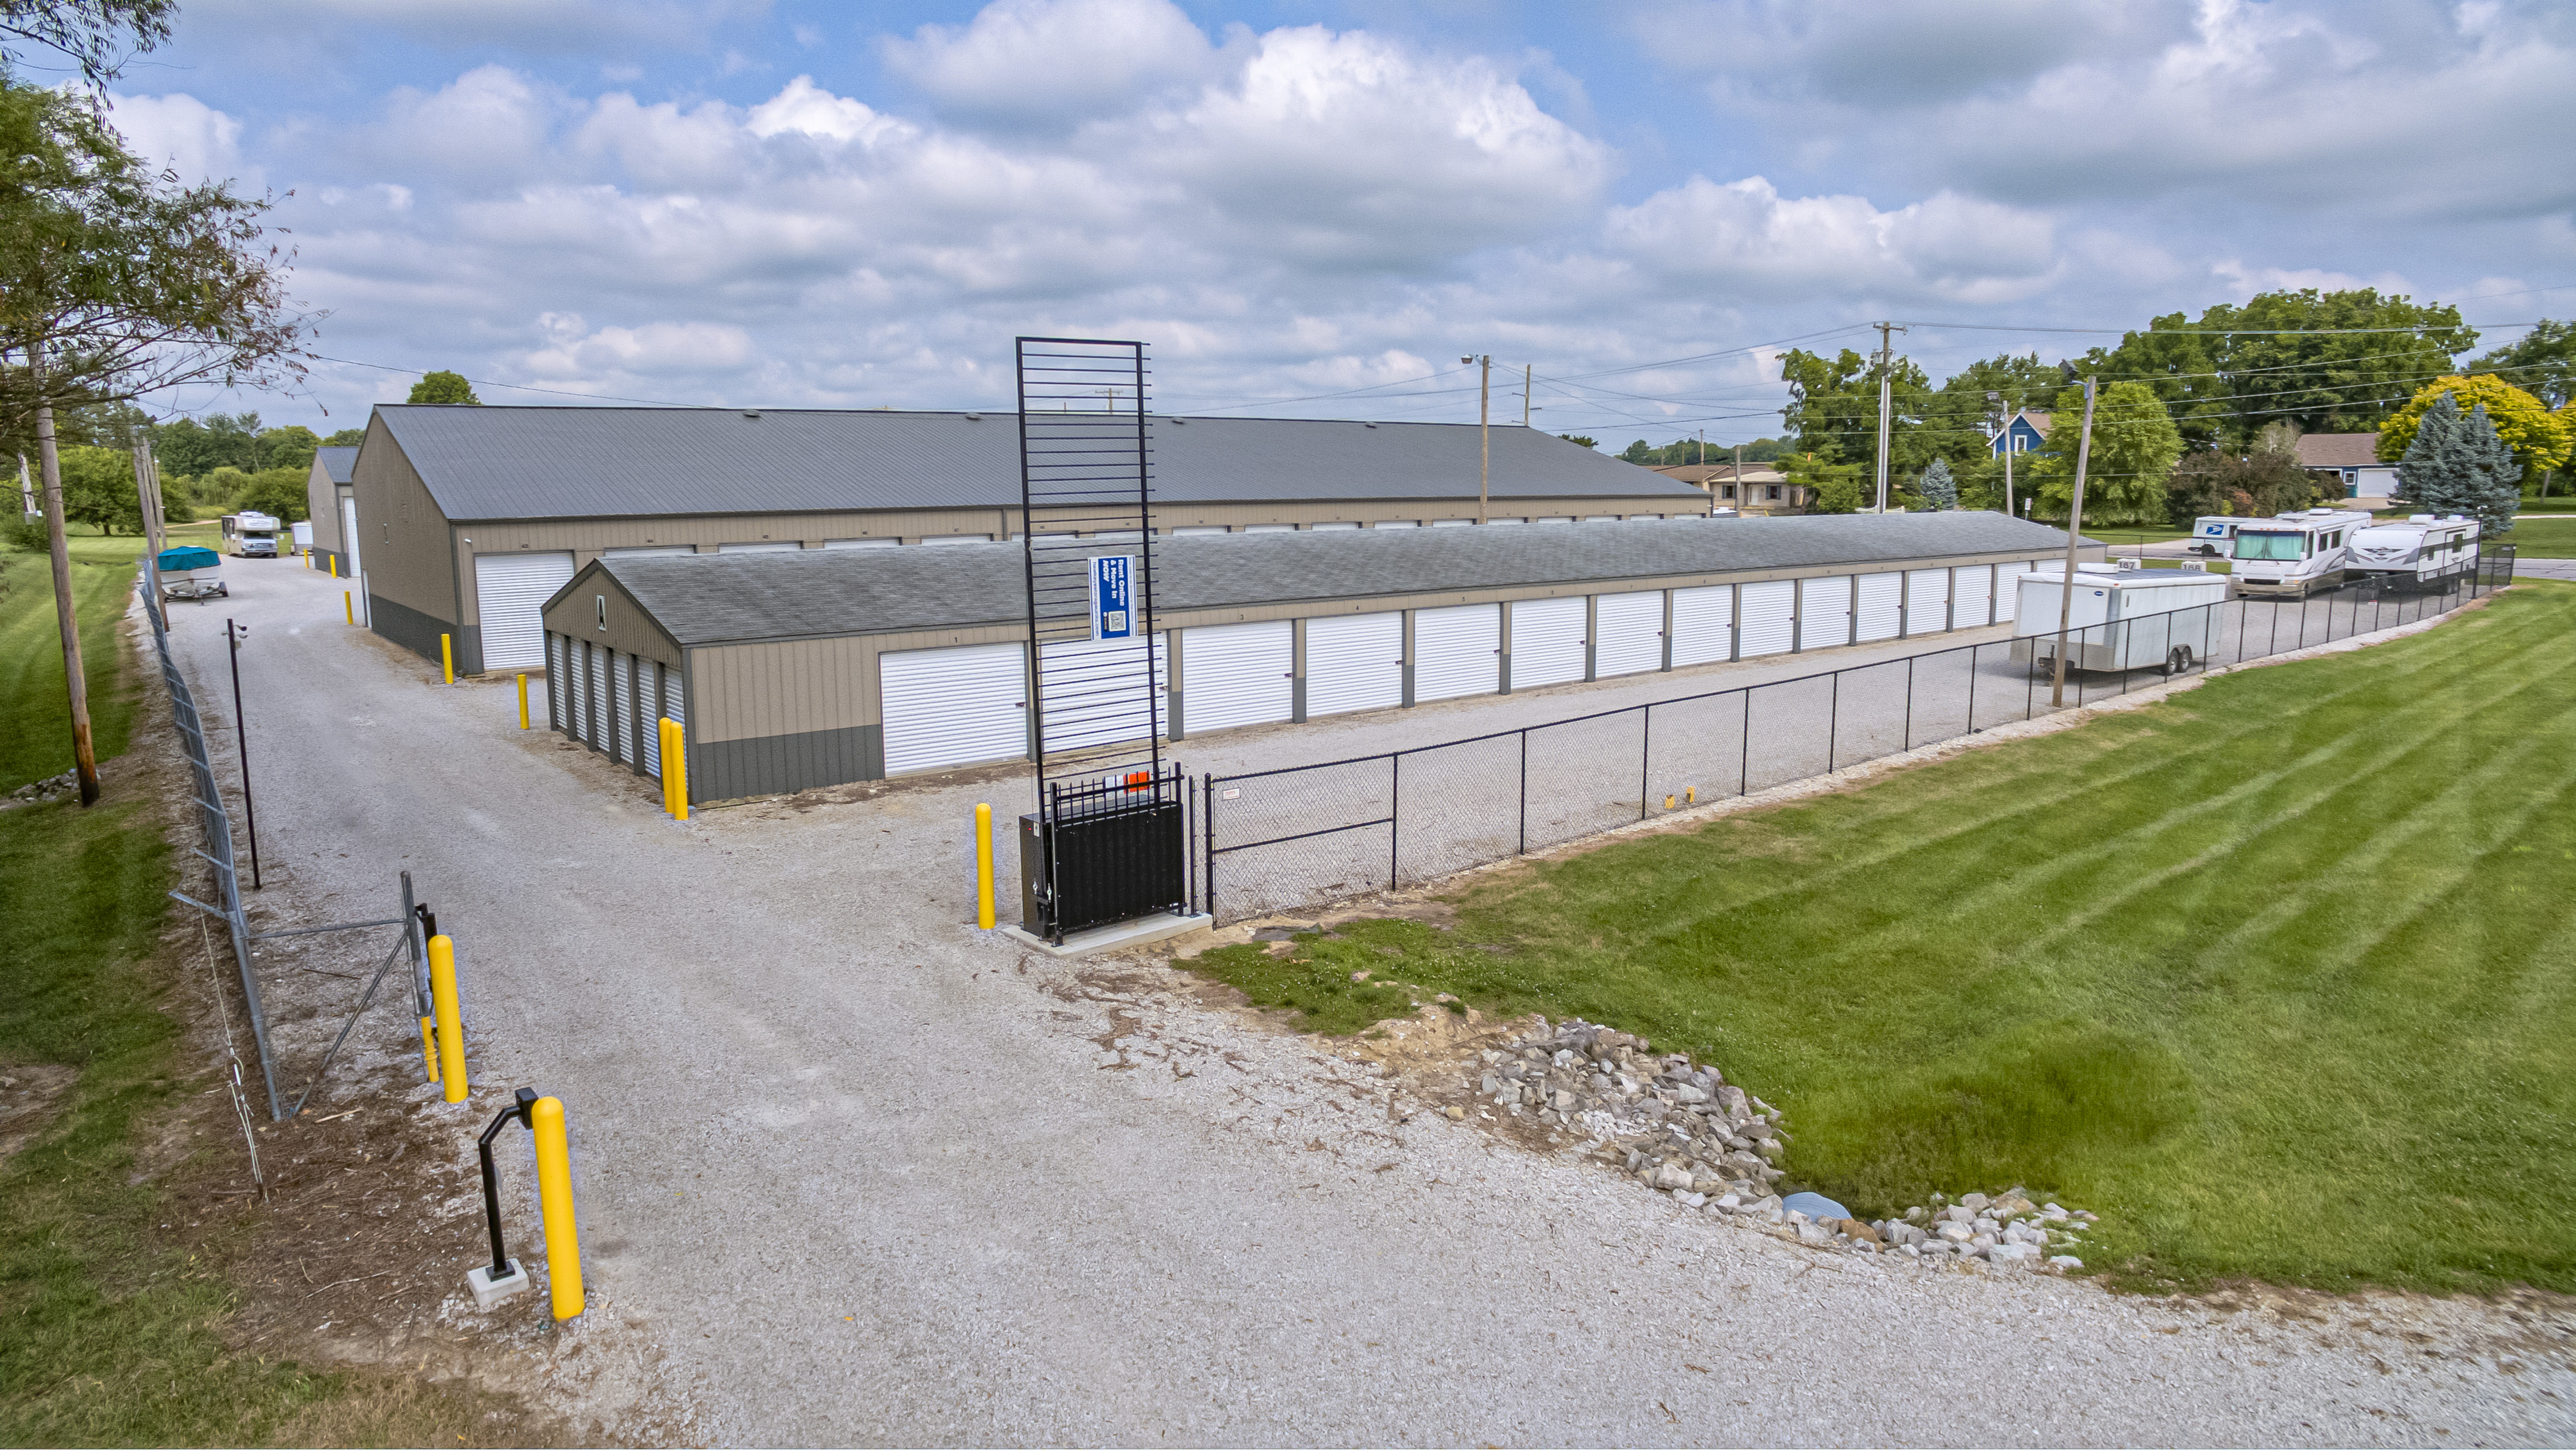 Gated access for storage facility in danville indiana